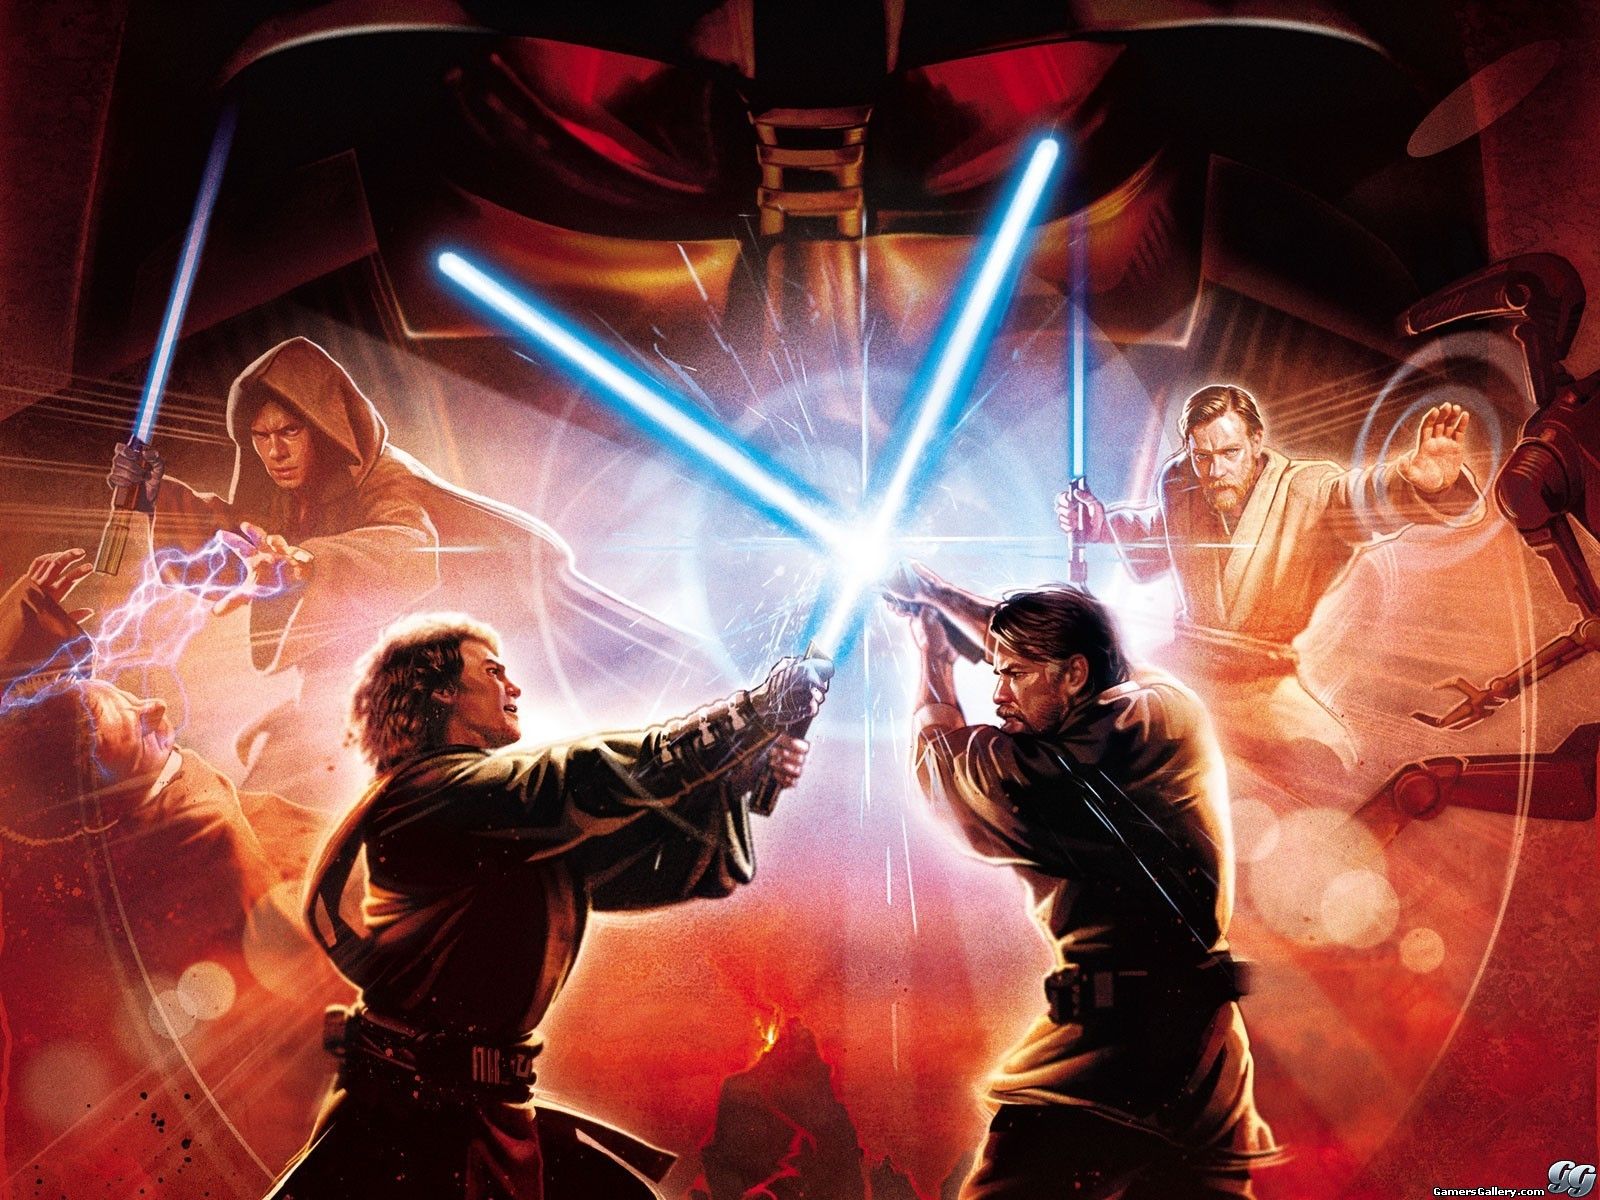 iPhone Wallpaper: Star Wars Revenge Of The Sith iPhone Wallpaper